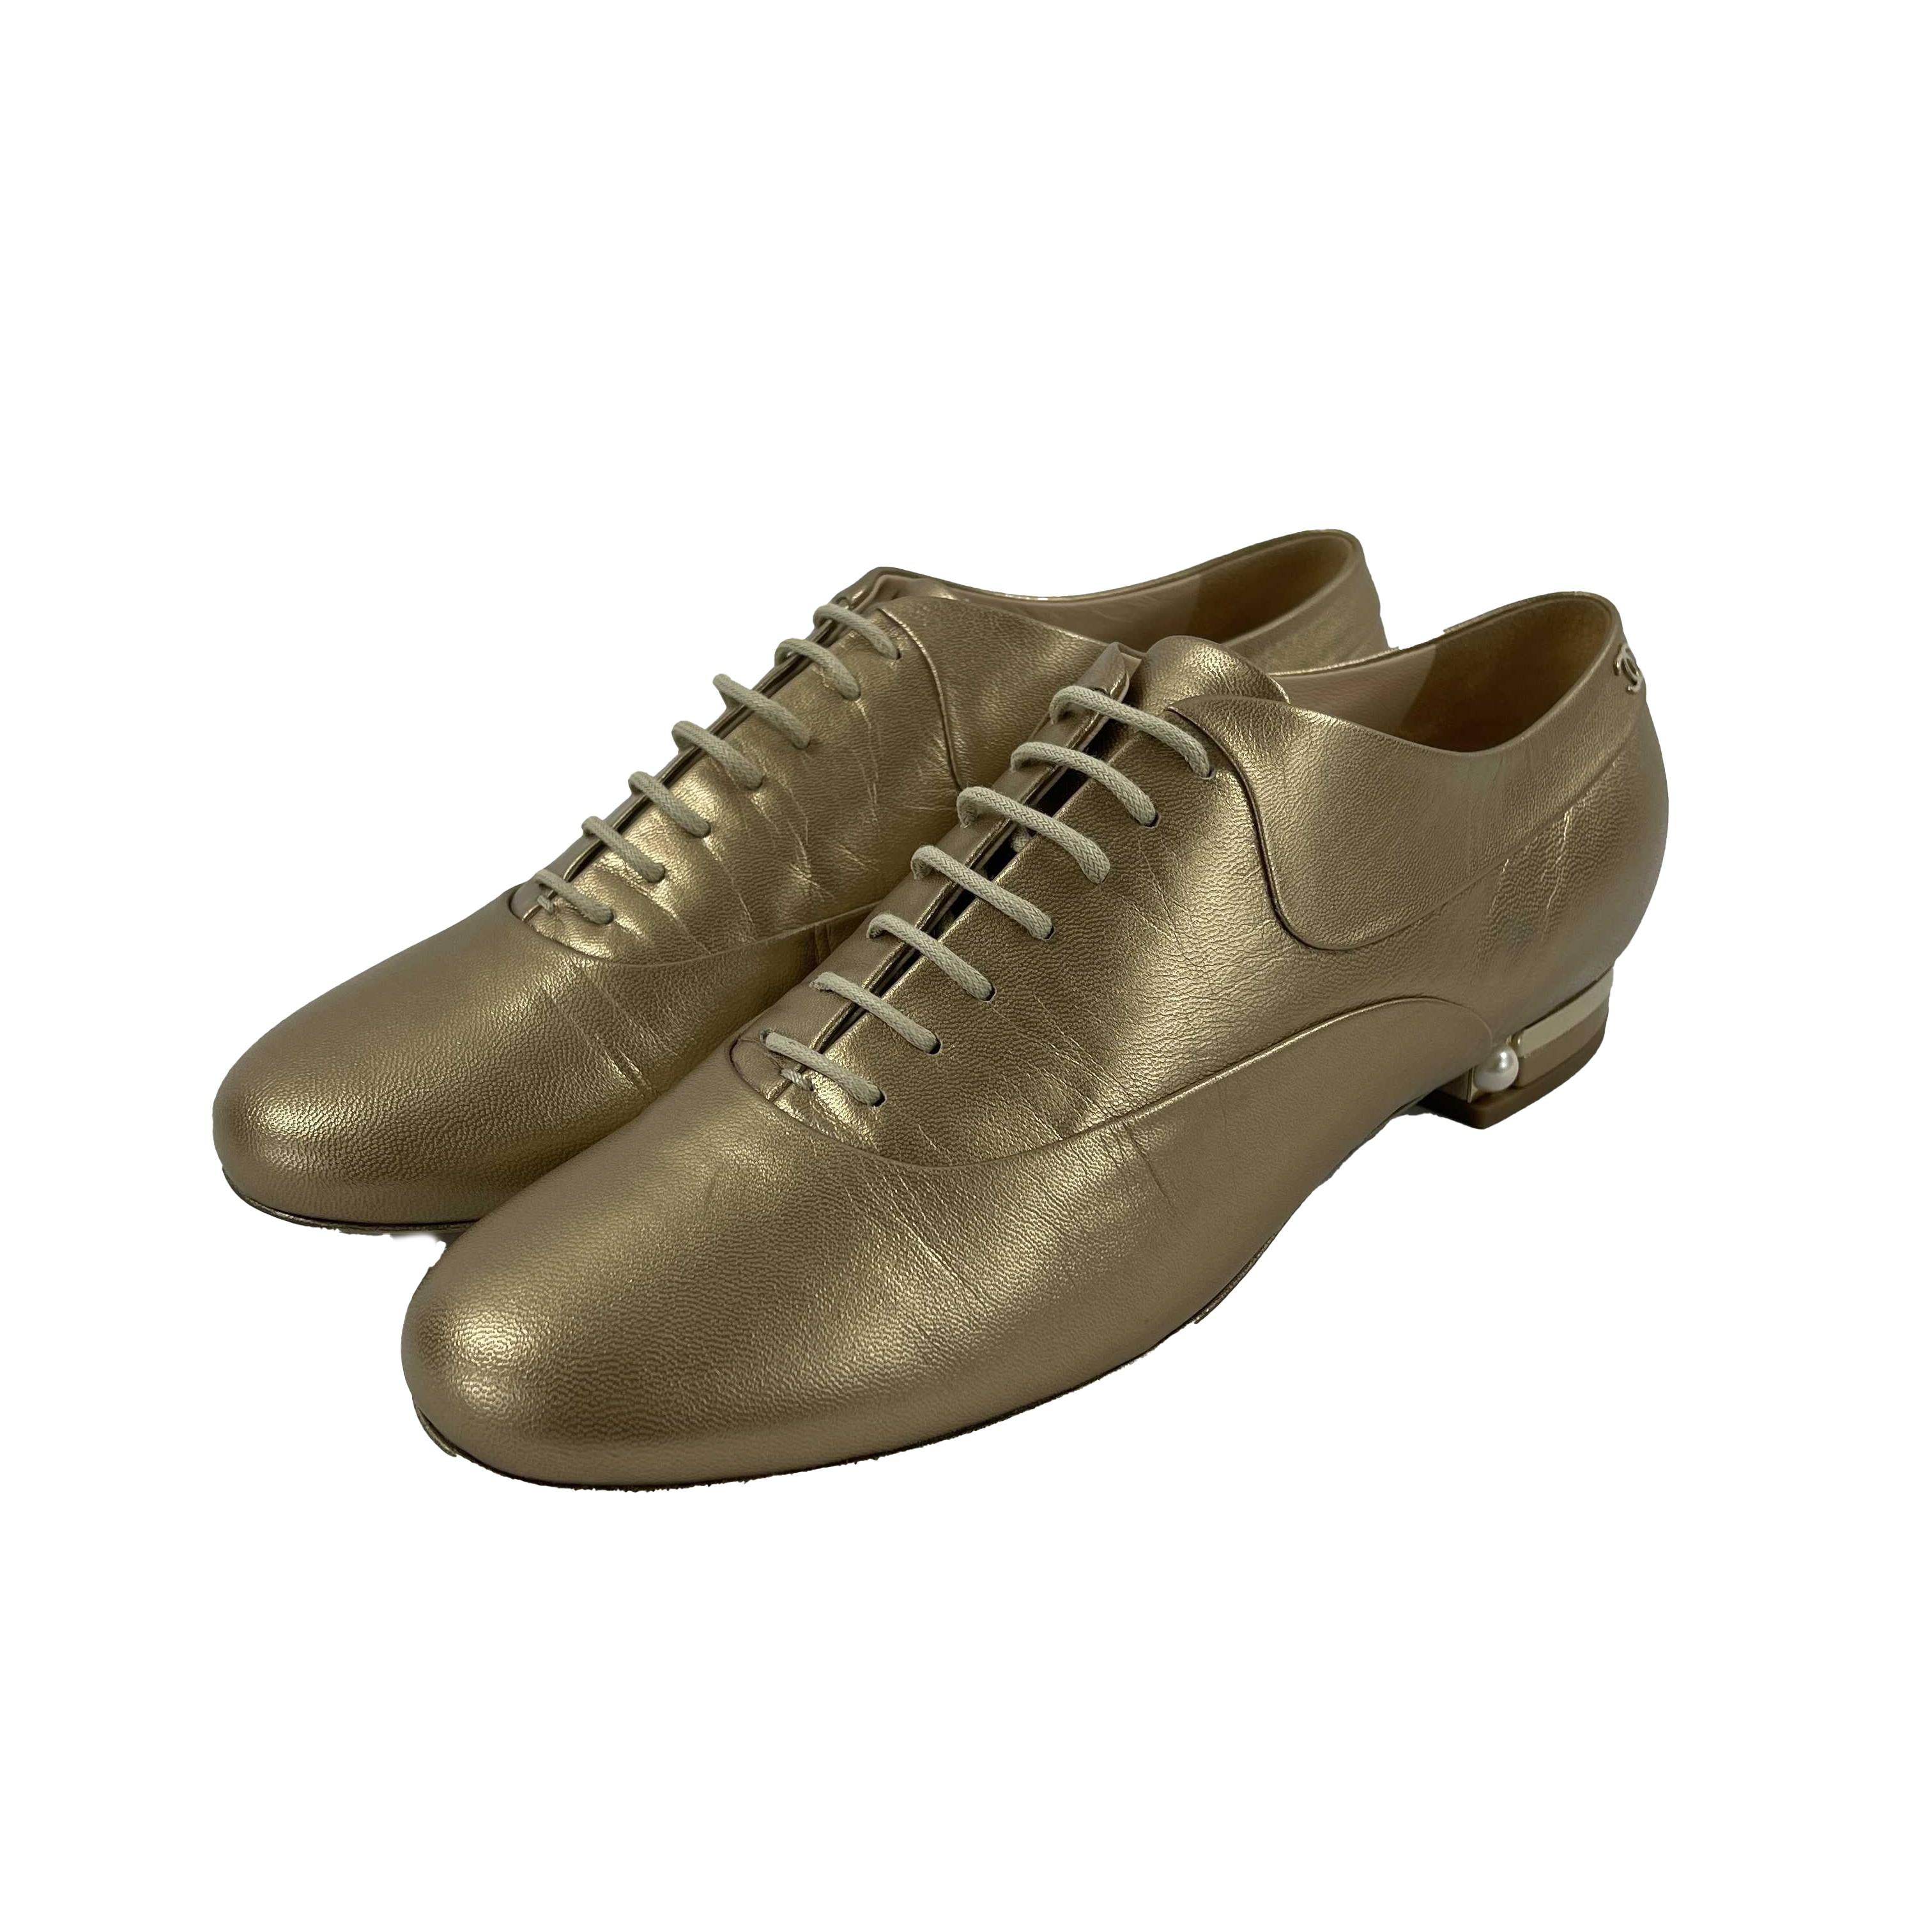 CHANEL NEW 2015 Metallic Gold Leather CC / Pearl Oxford Shoes 39 US 9 1